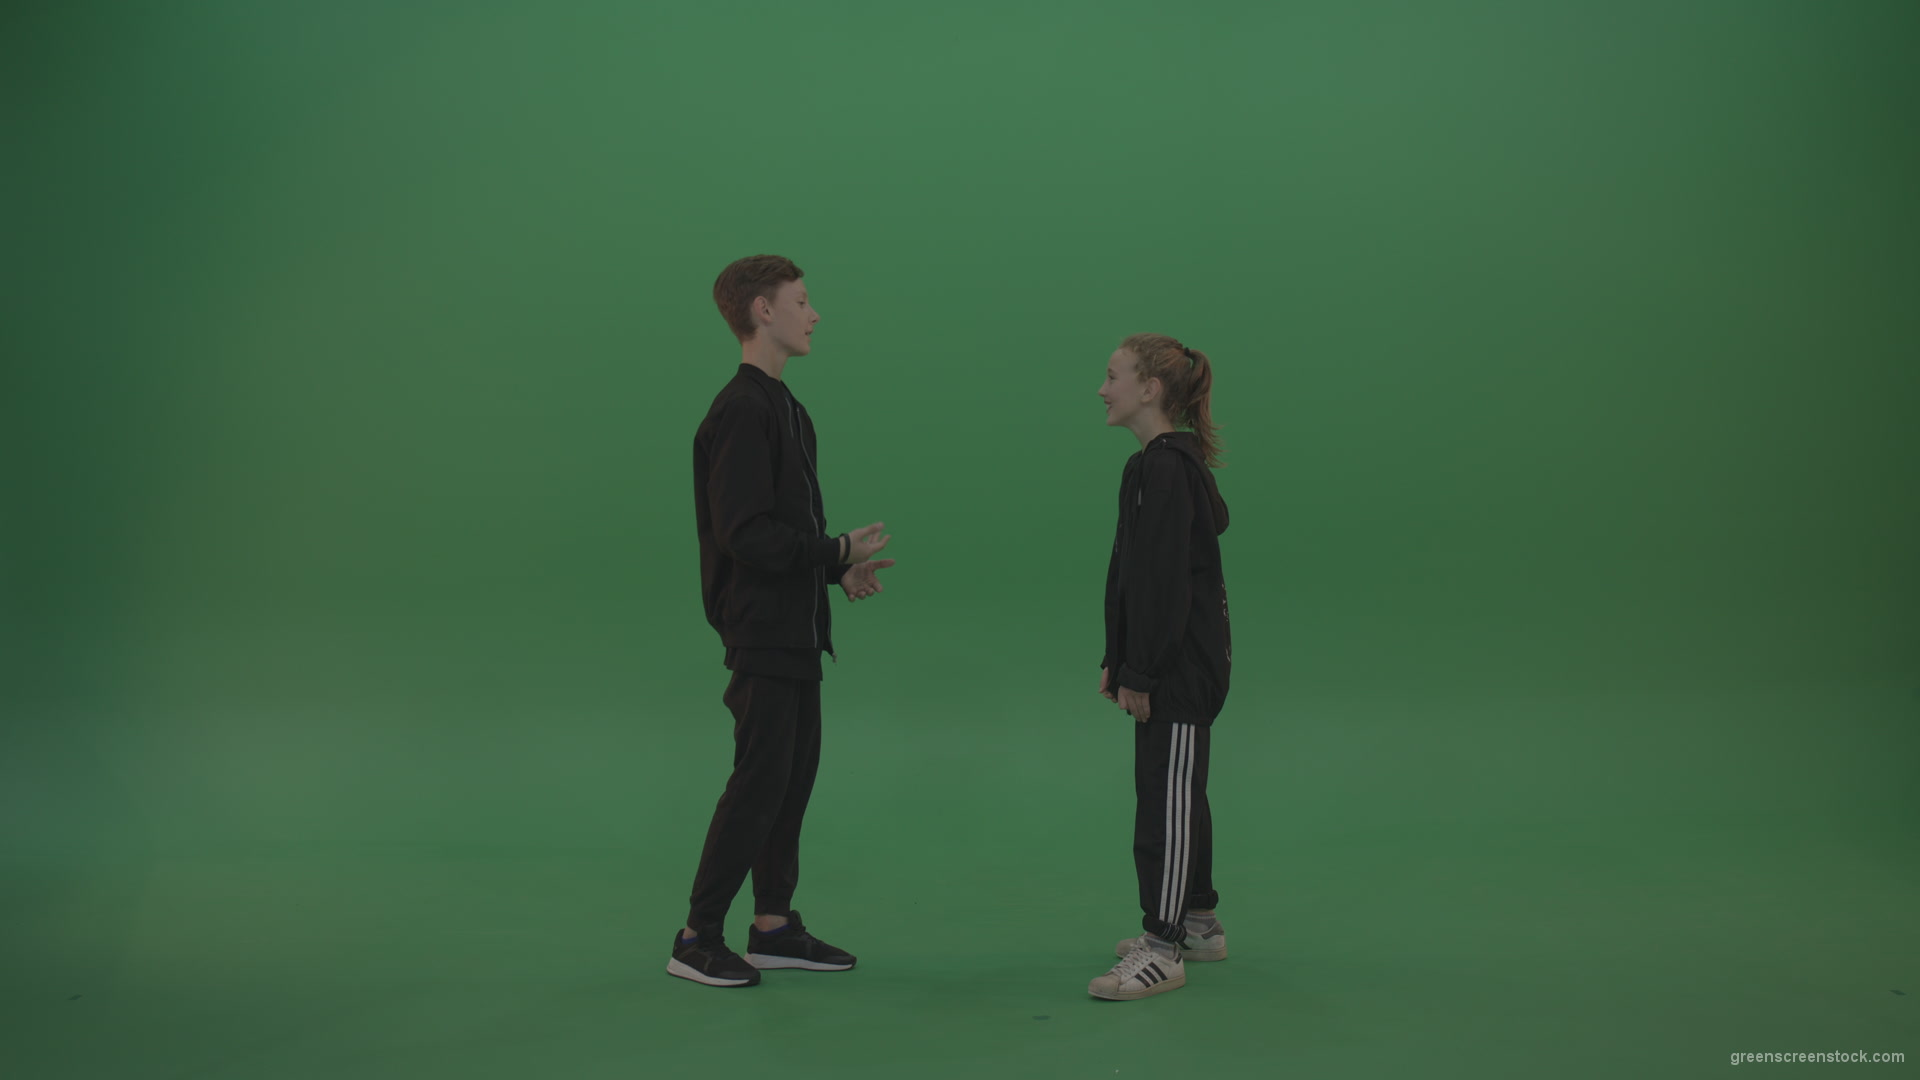 Boy-in-black-wear-talks-to-girl-over-chromakey-background_002 Green Screen Stock